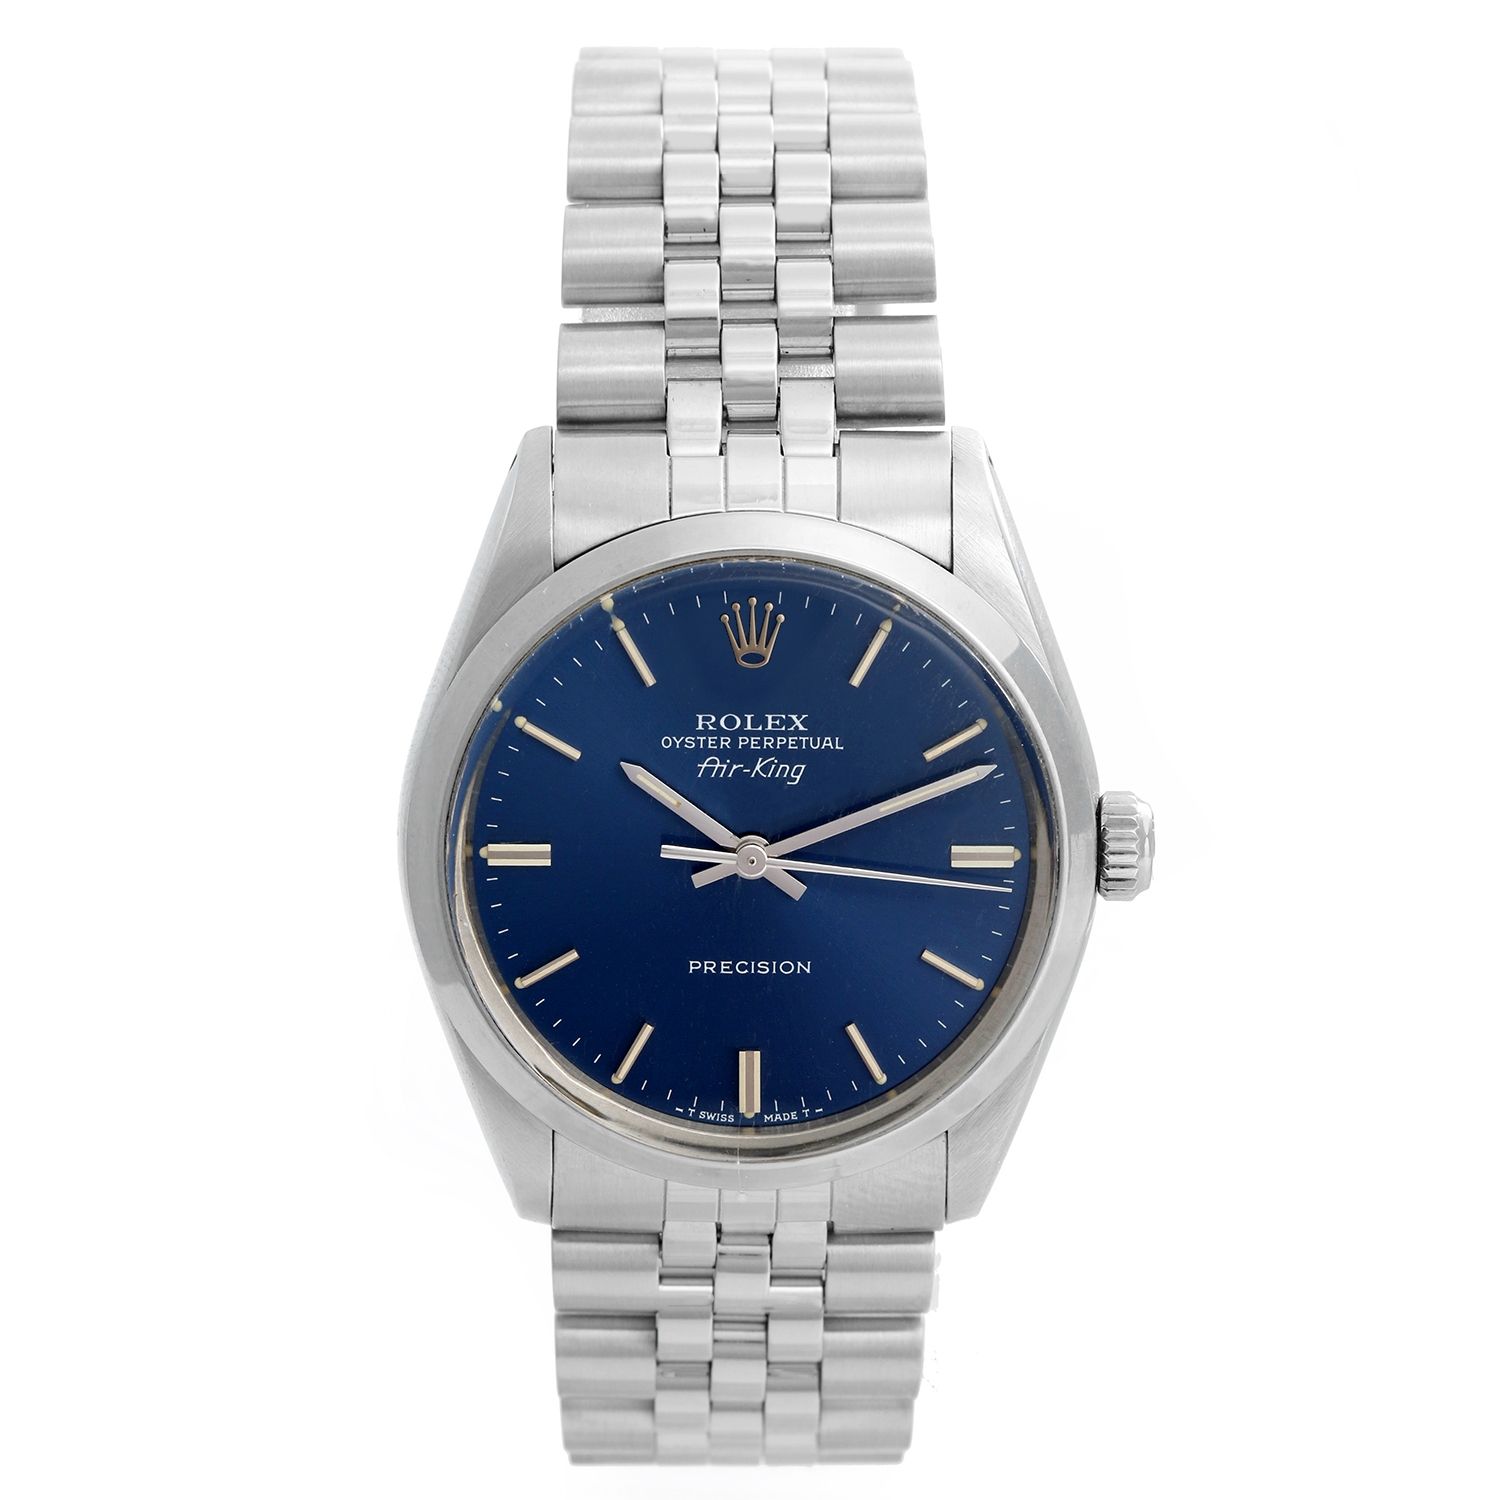 Stainless Steel Oyster Perpetual Watch 5500